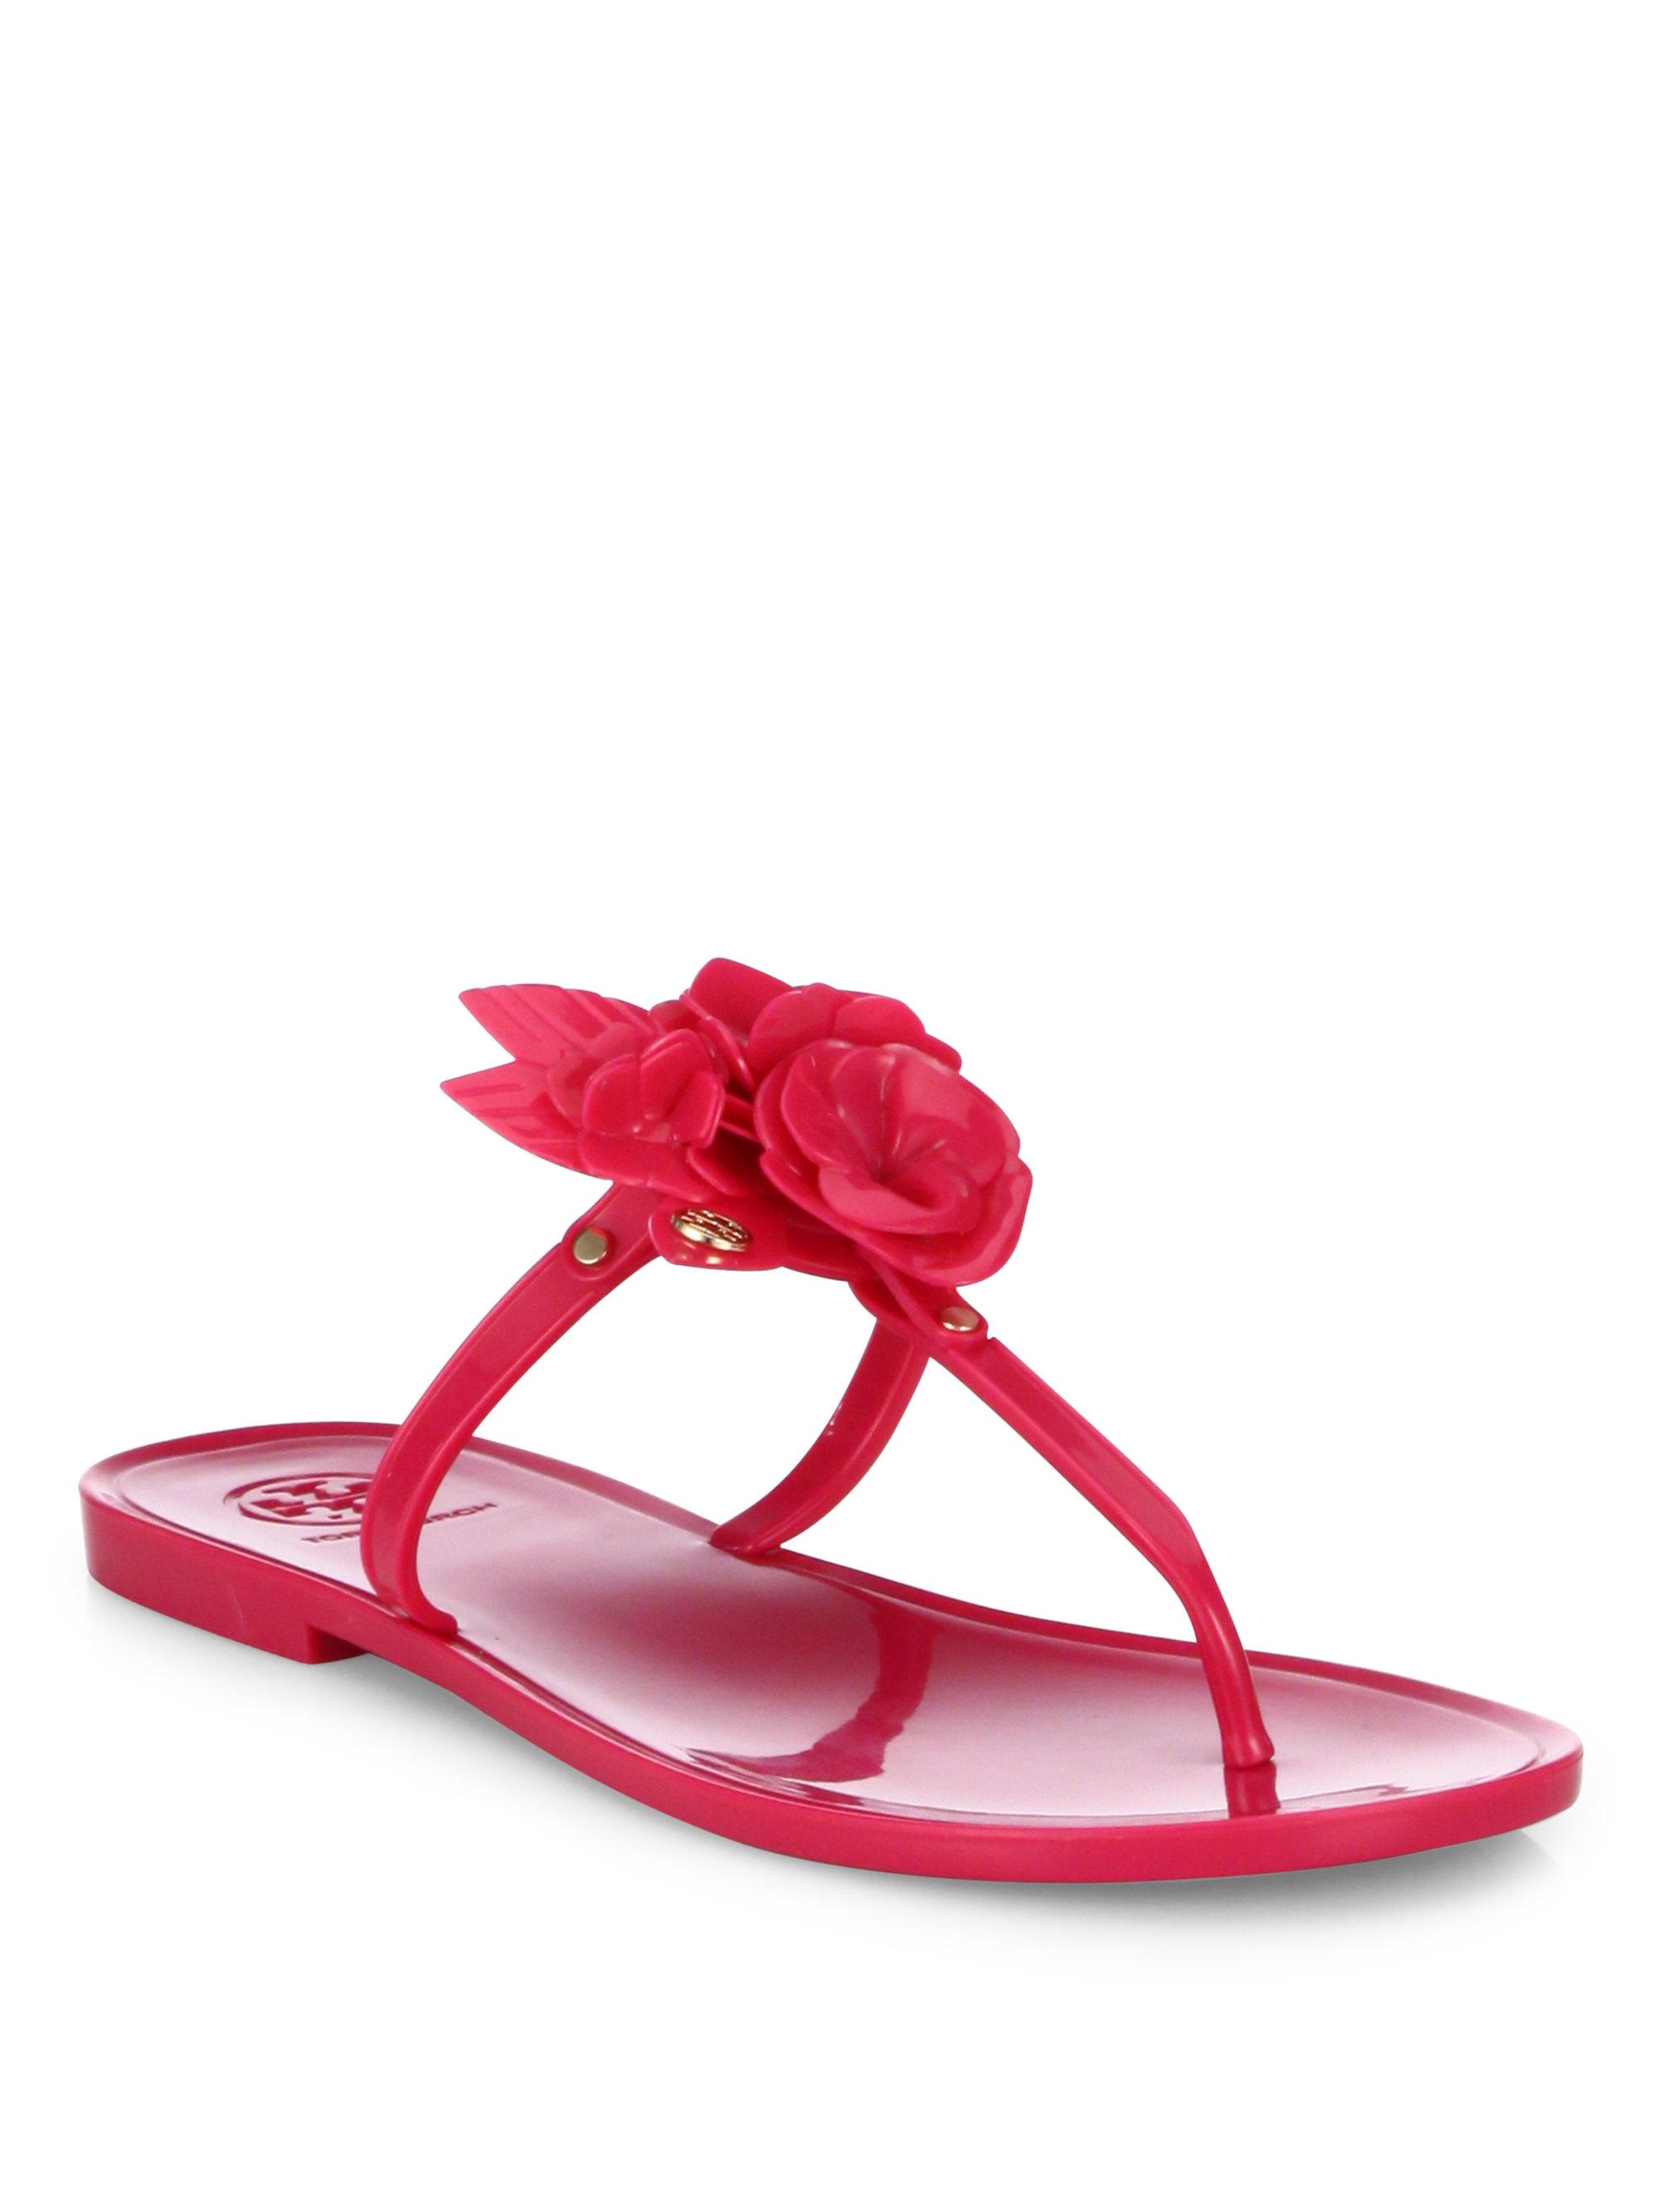 Blossom Jelly Thong Sandals in Pink 